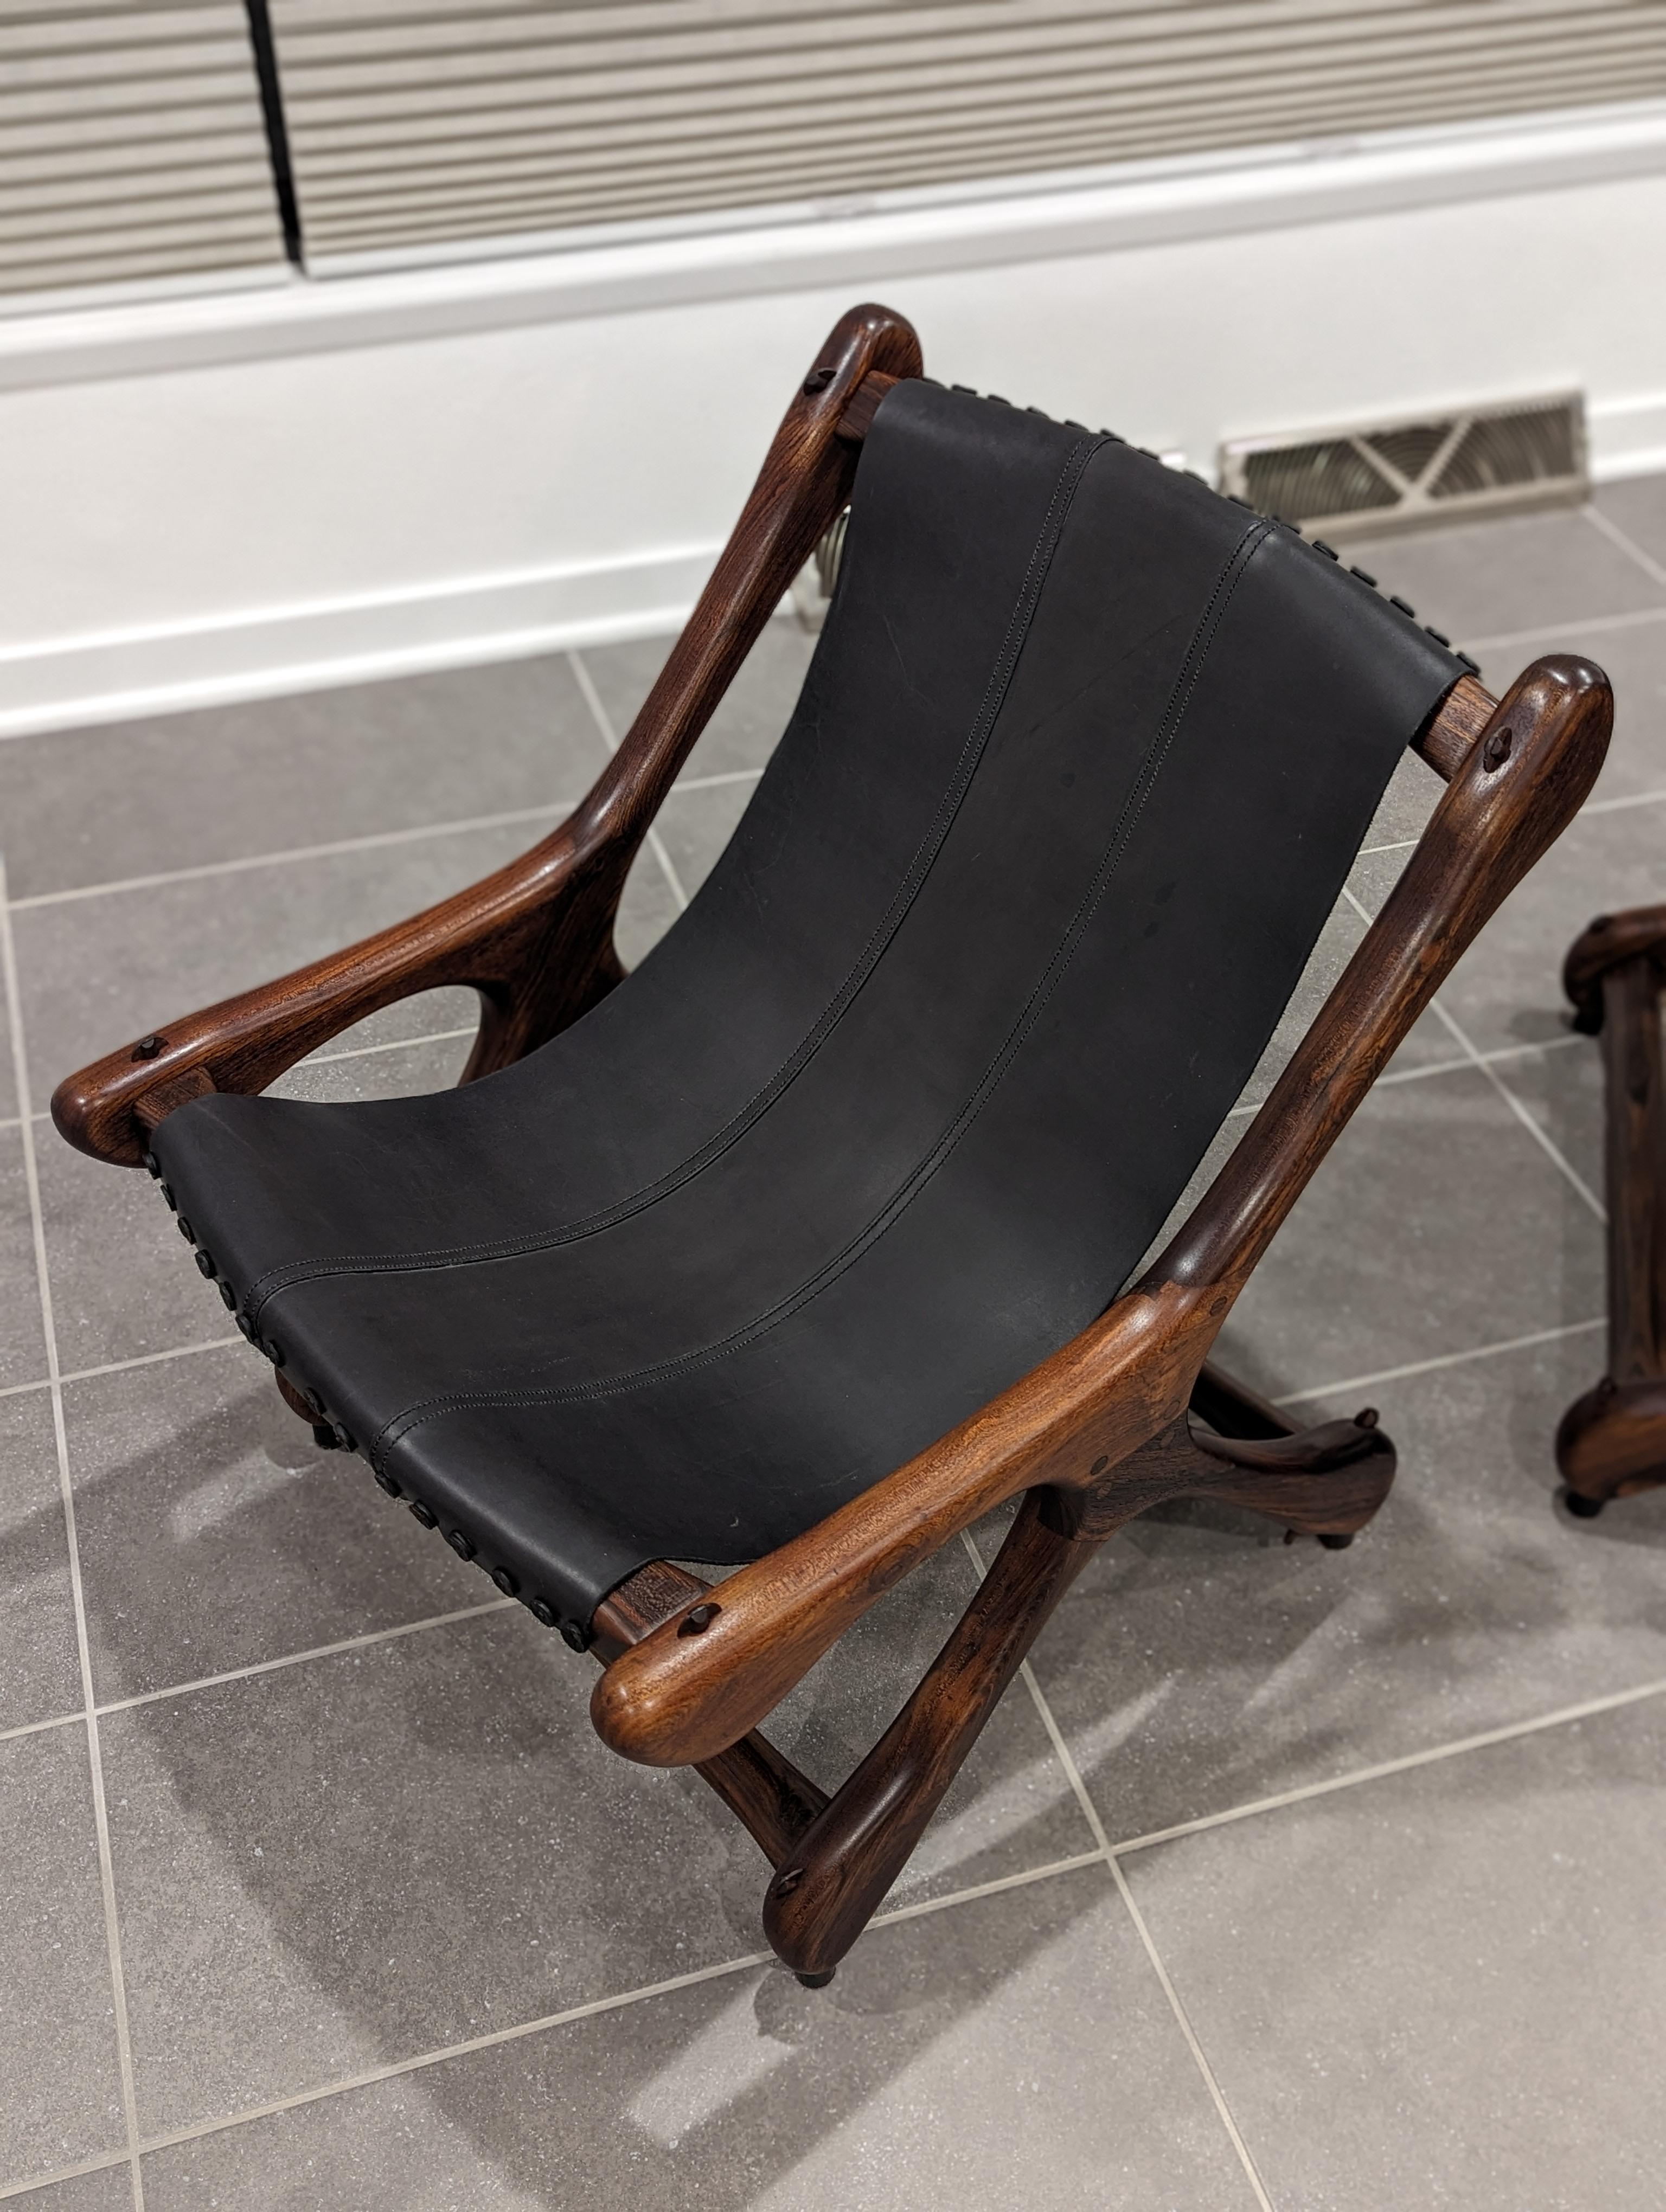 Don Shoemaker Sloucher Rosewood & Leather Sling Chairs for Señal, S.A., 1960s For Sale 10